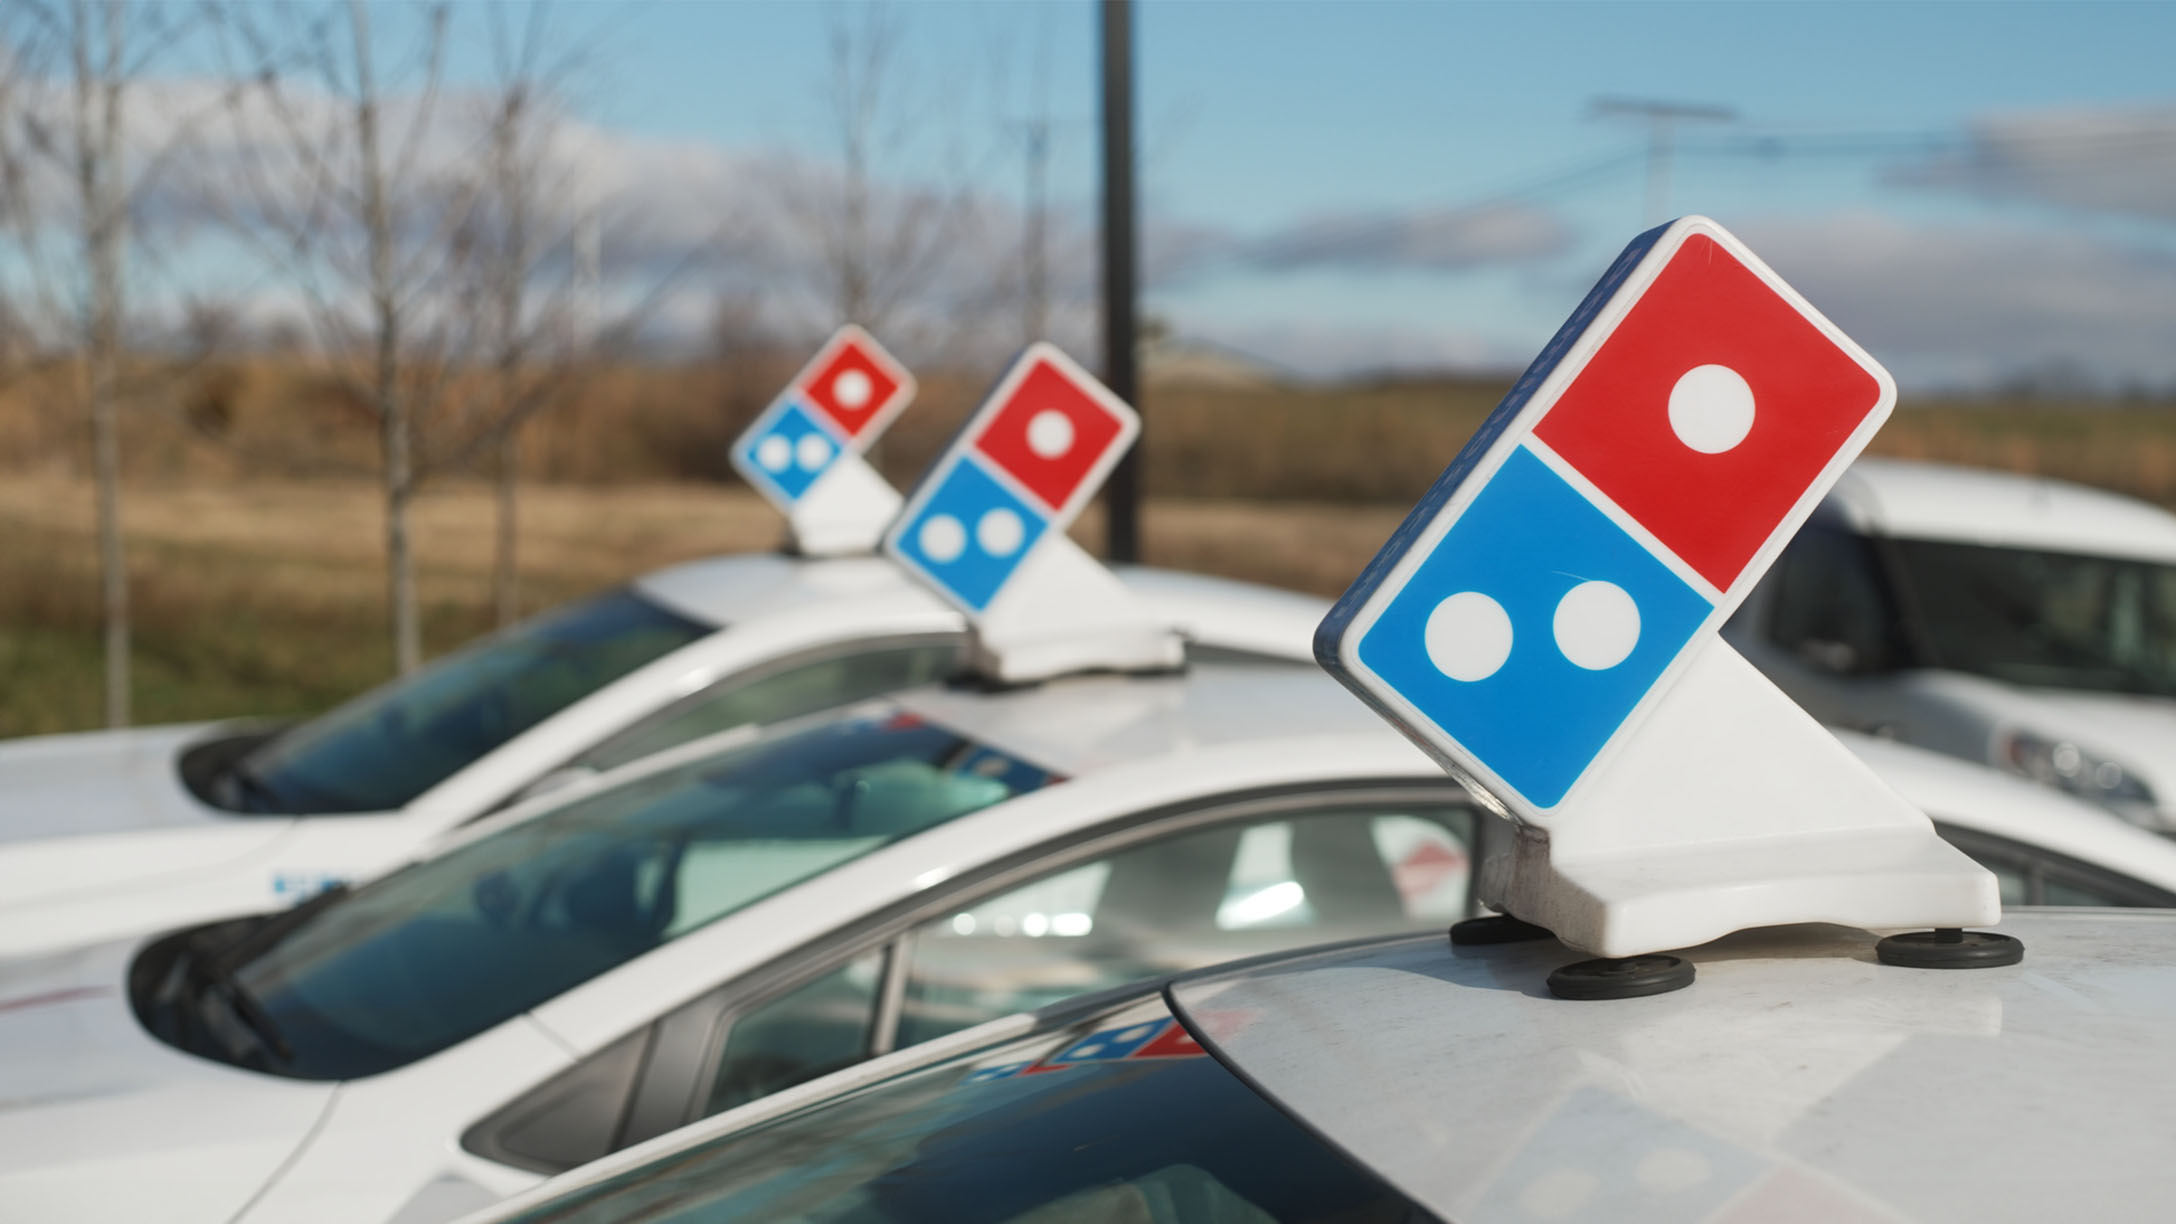 dominos logo on a delivery car